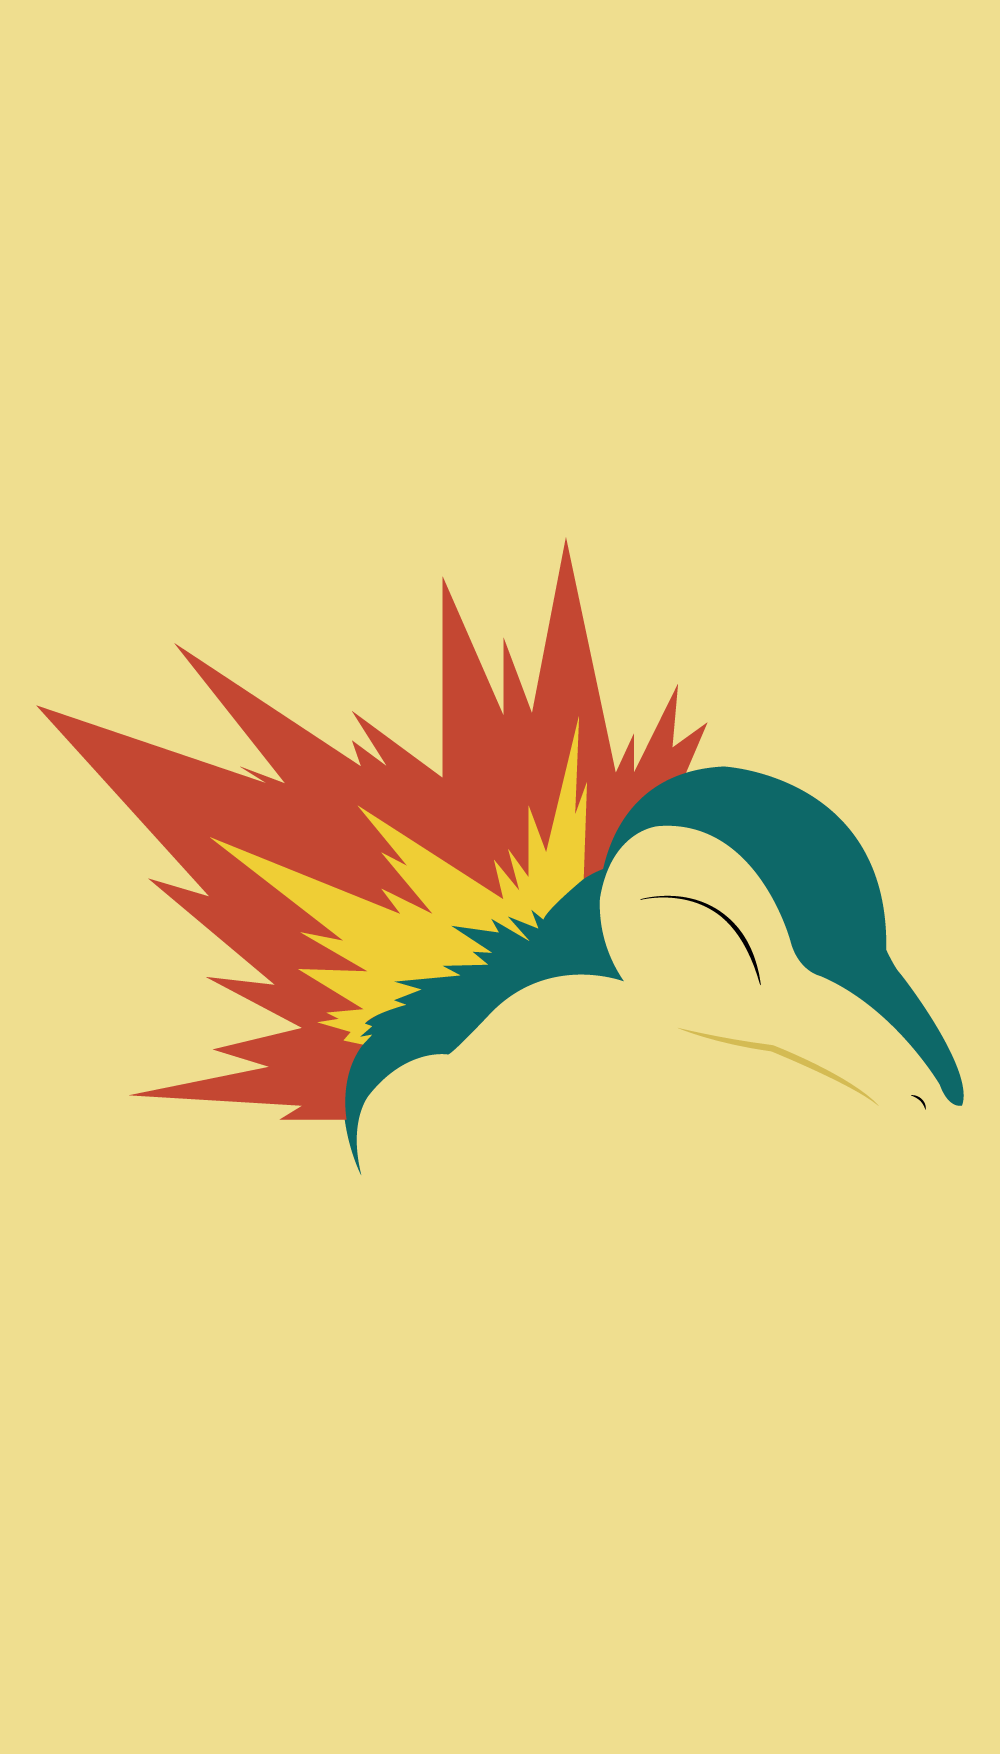 Cyndaquil Wallpapers Wallpaper Cave Images, Photos, Reviews